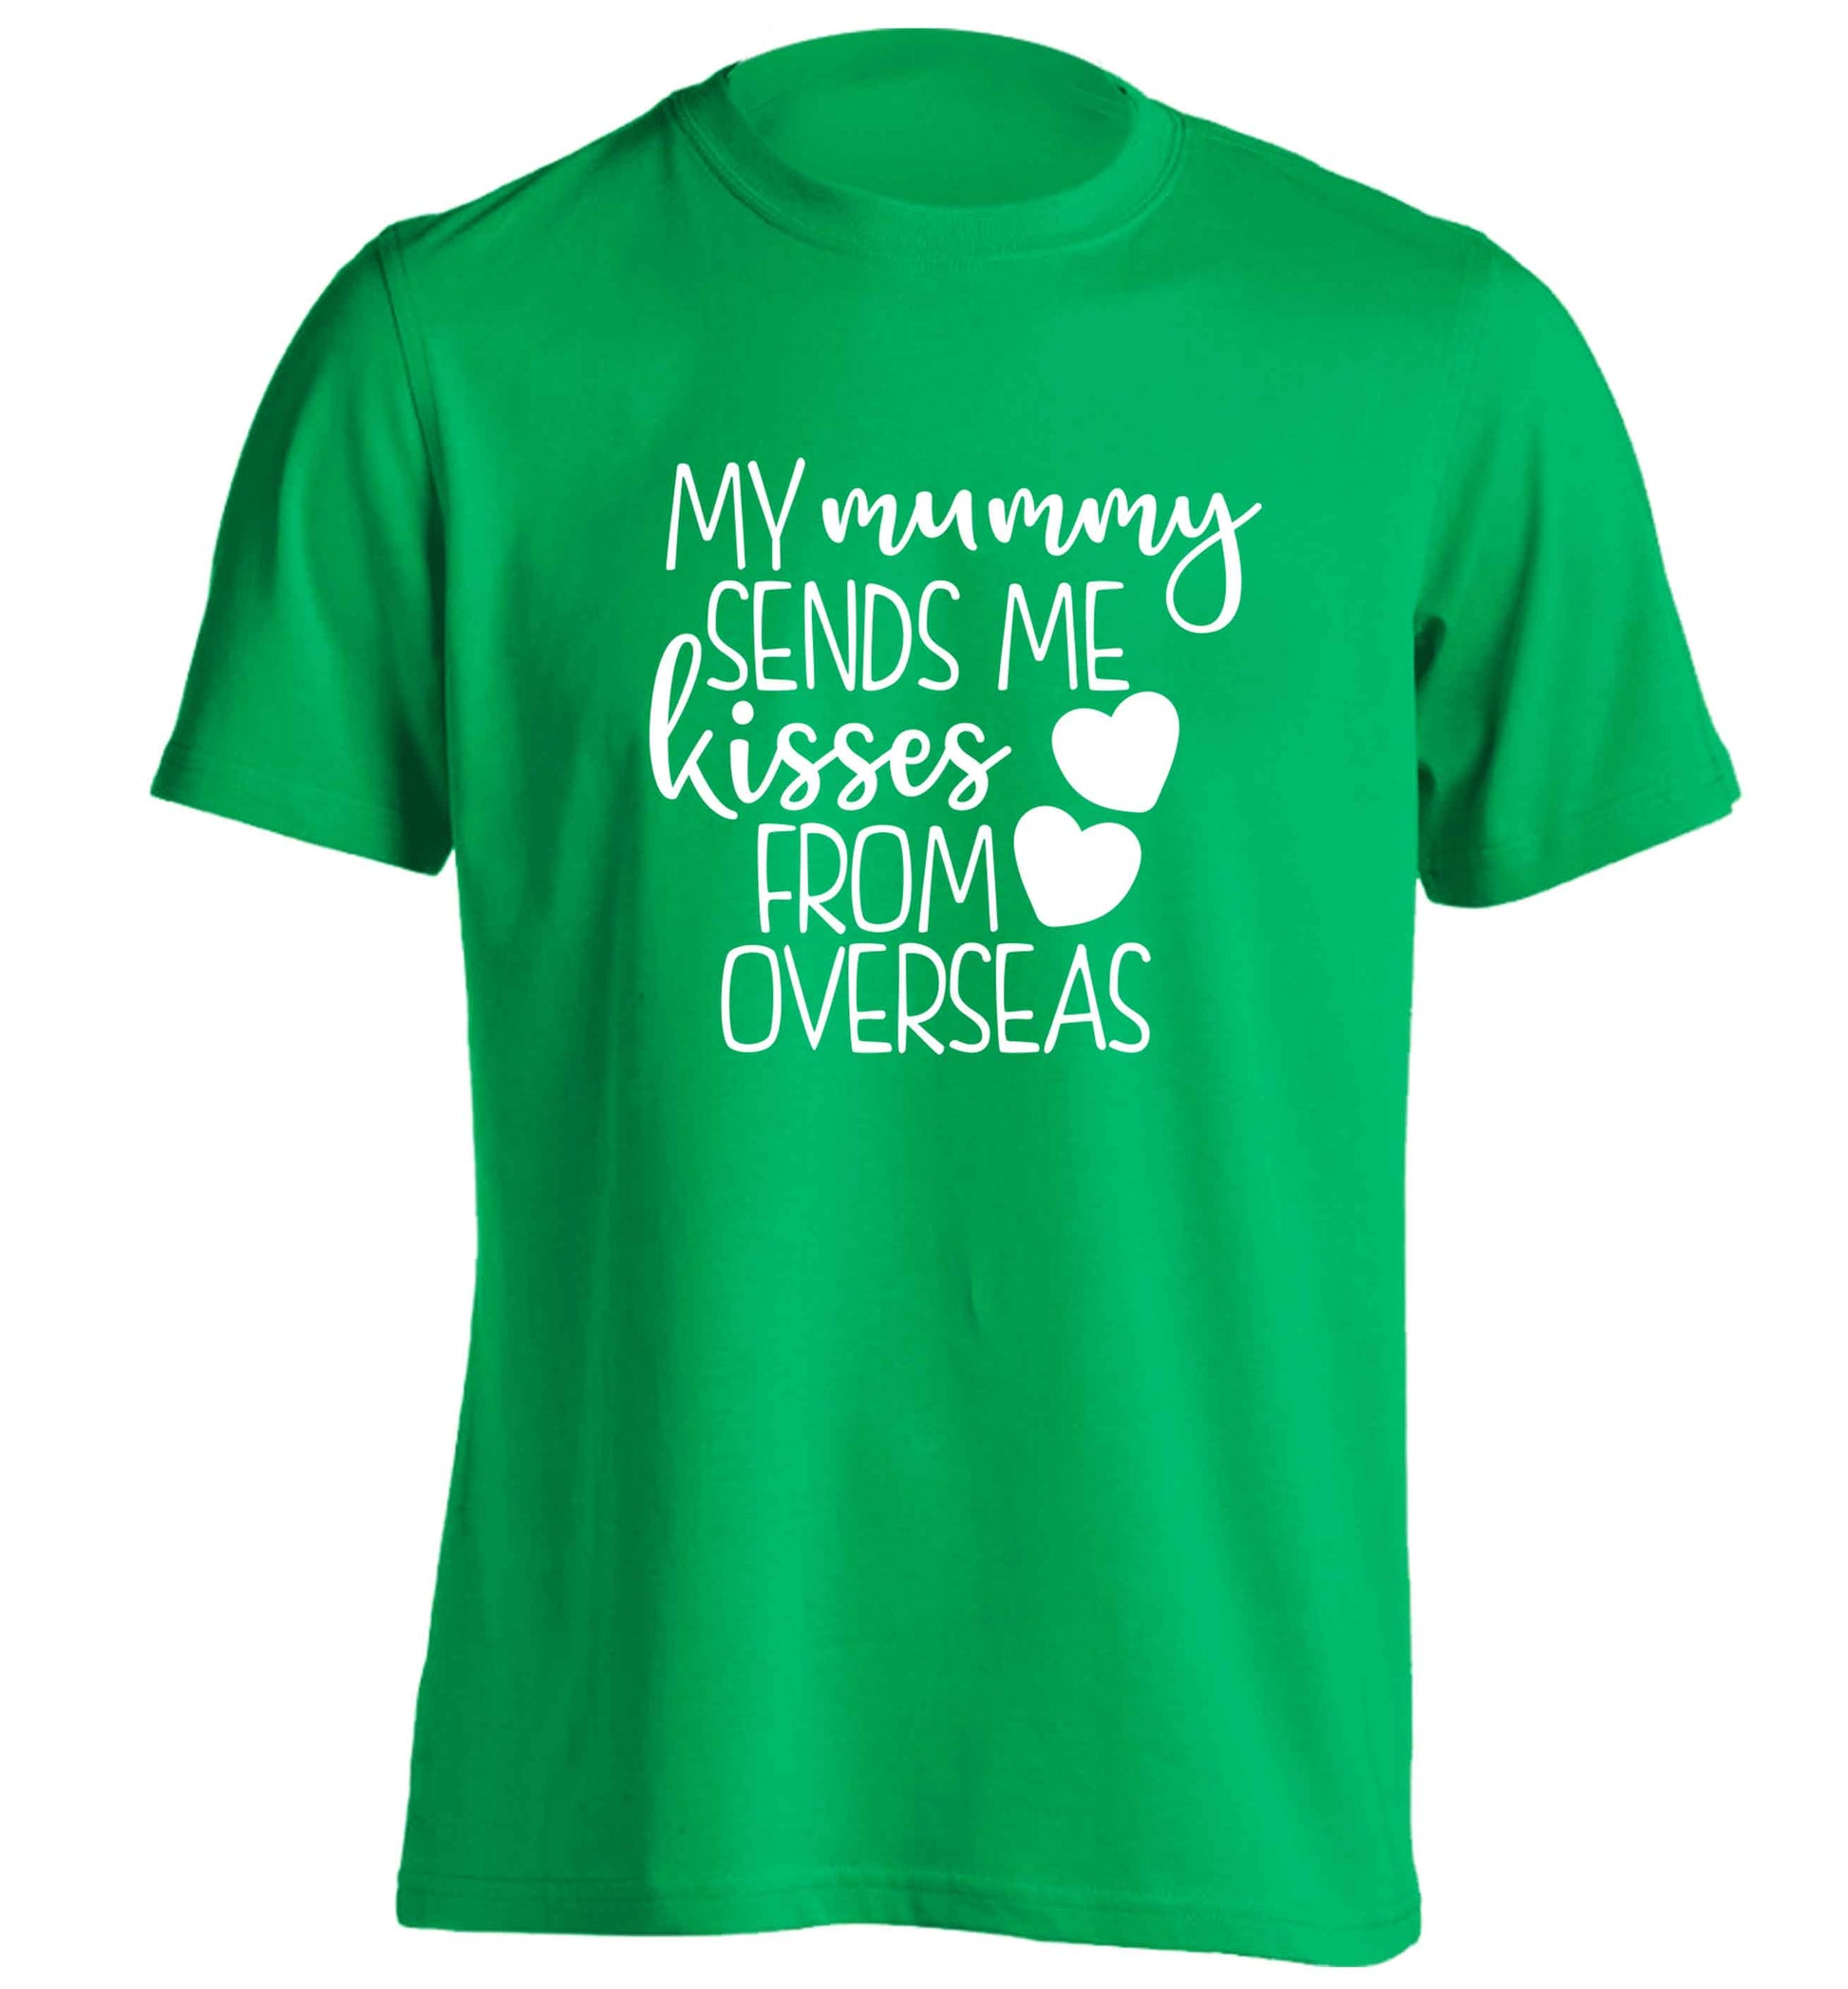 My mummy sends me kisses from overseas adults unisex green Tshirt small